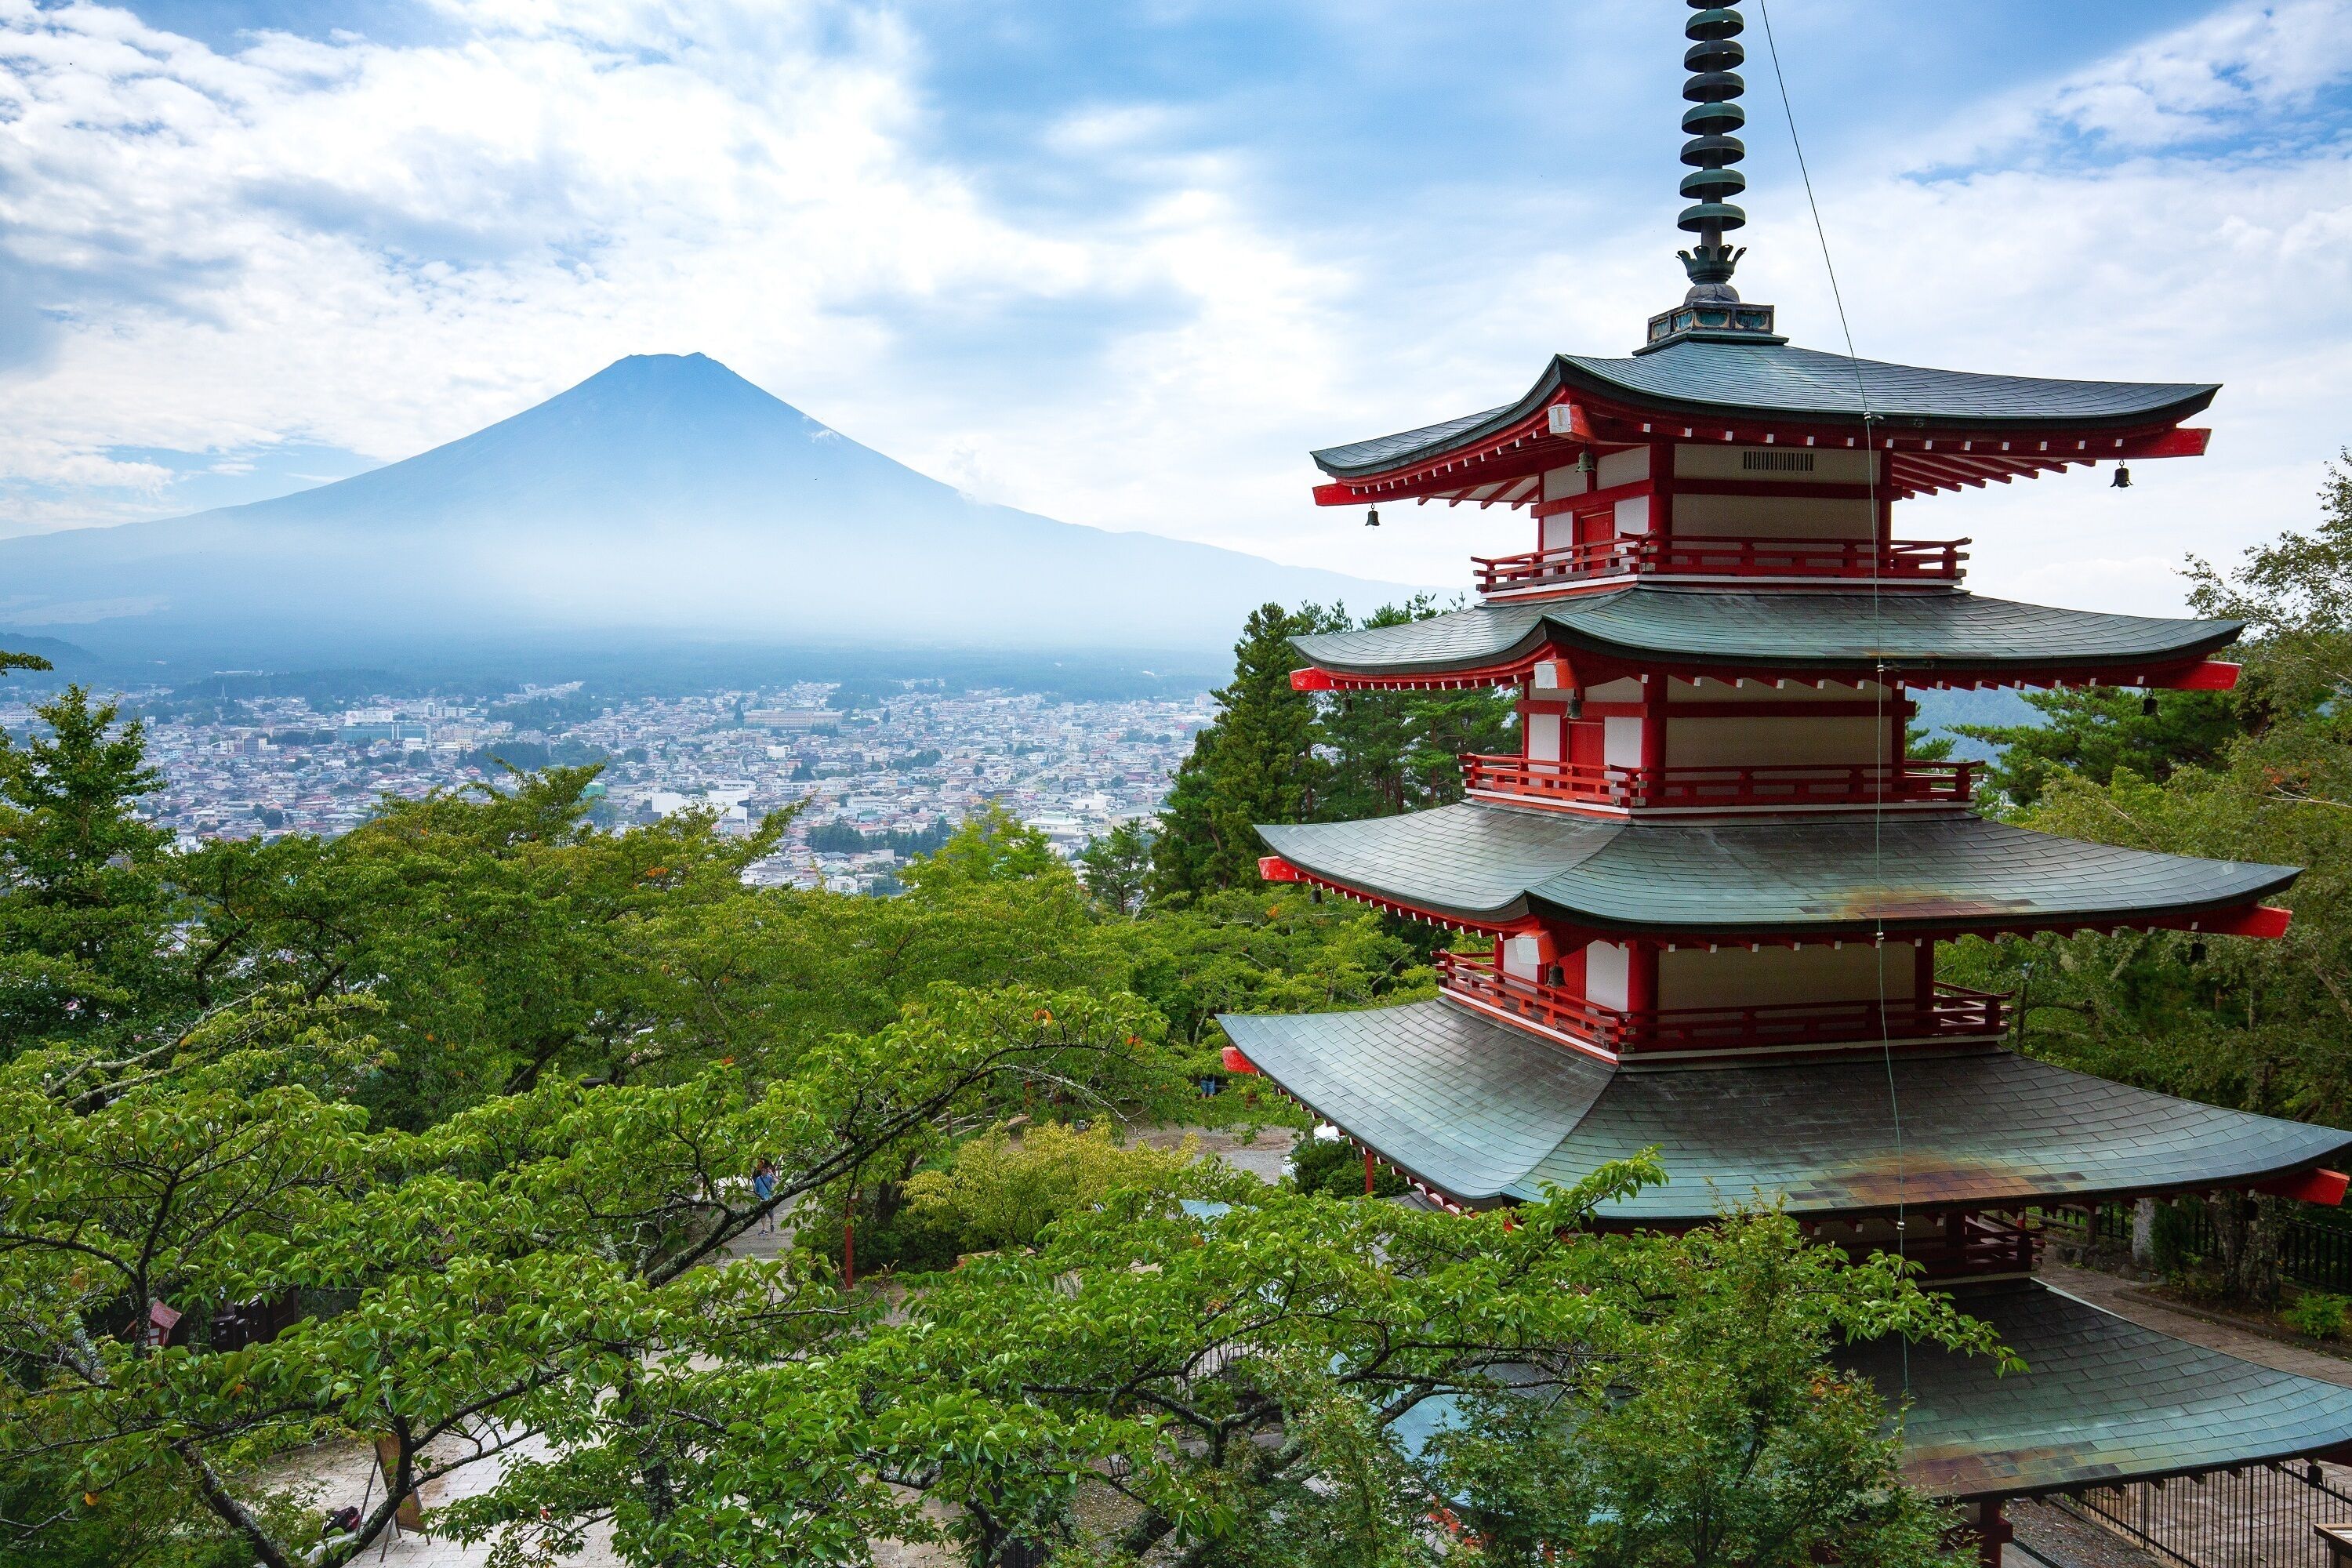 10 TOP Things to Do in Tokyo (2020 Attraction & Activity Guide) | Expedia